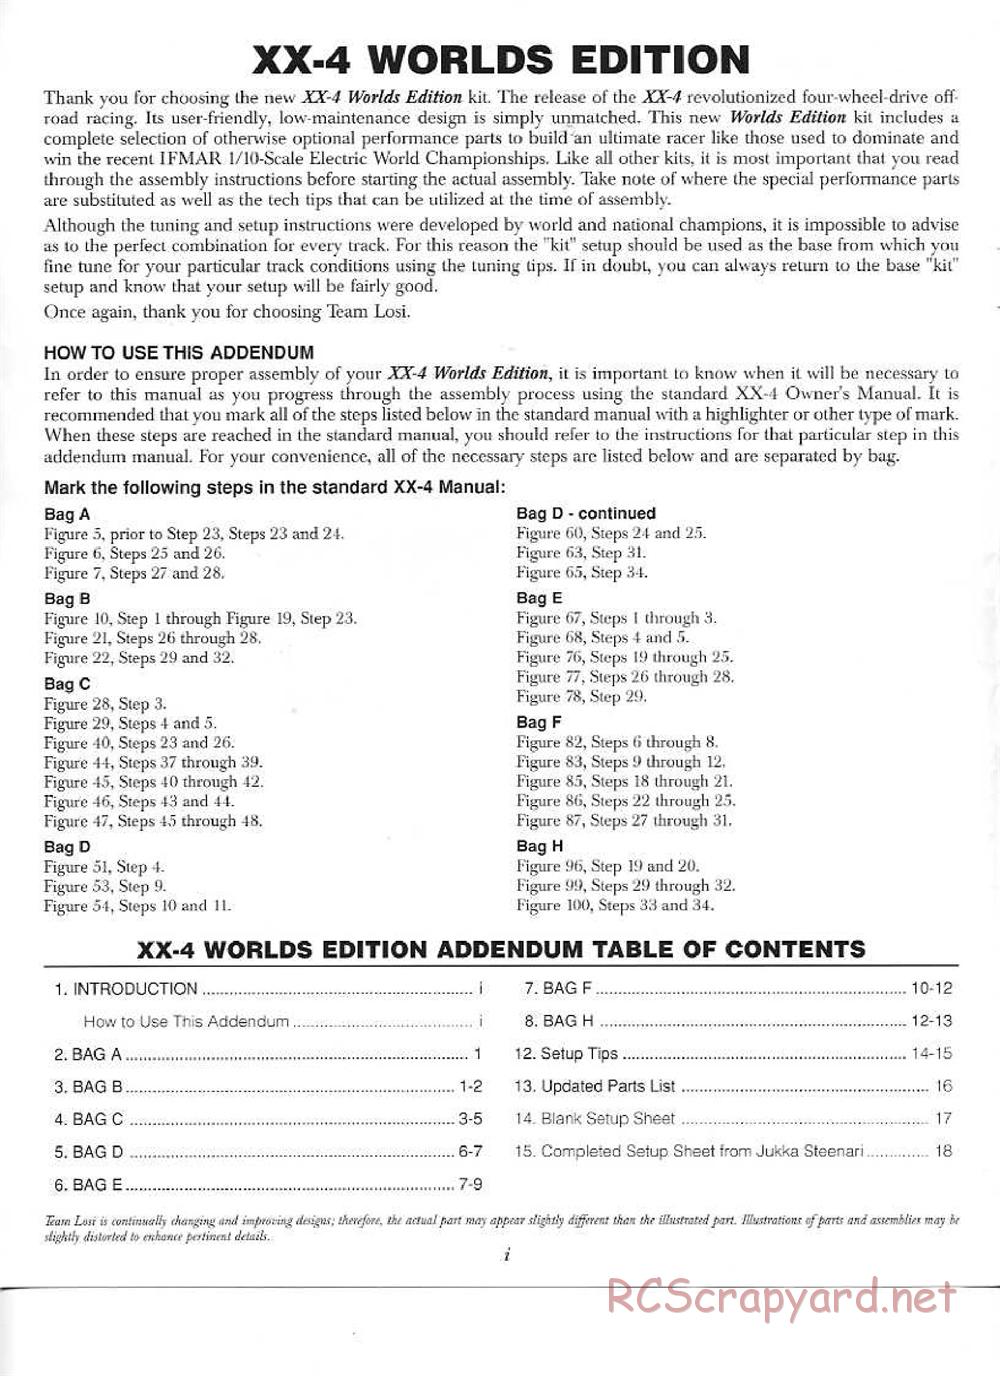 Team Losi - XX-4 Worlds Edition - Manual - Page 2